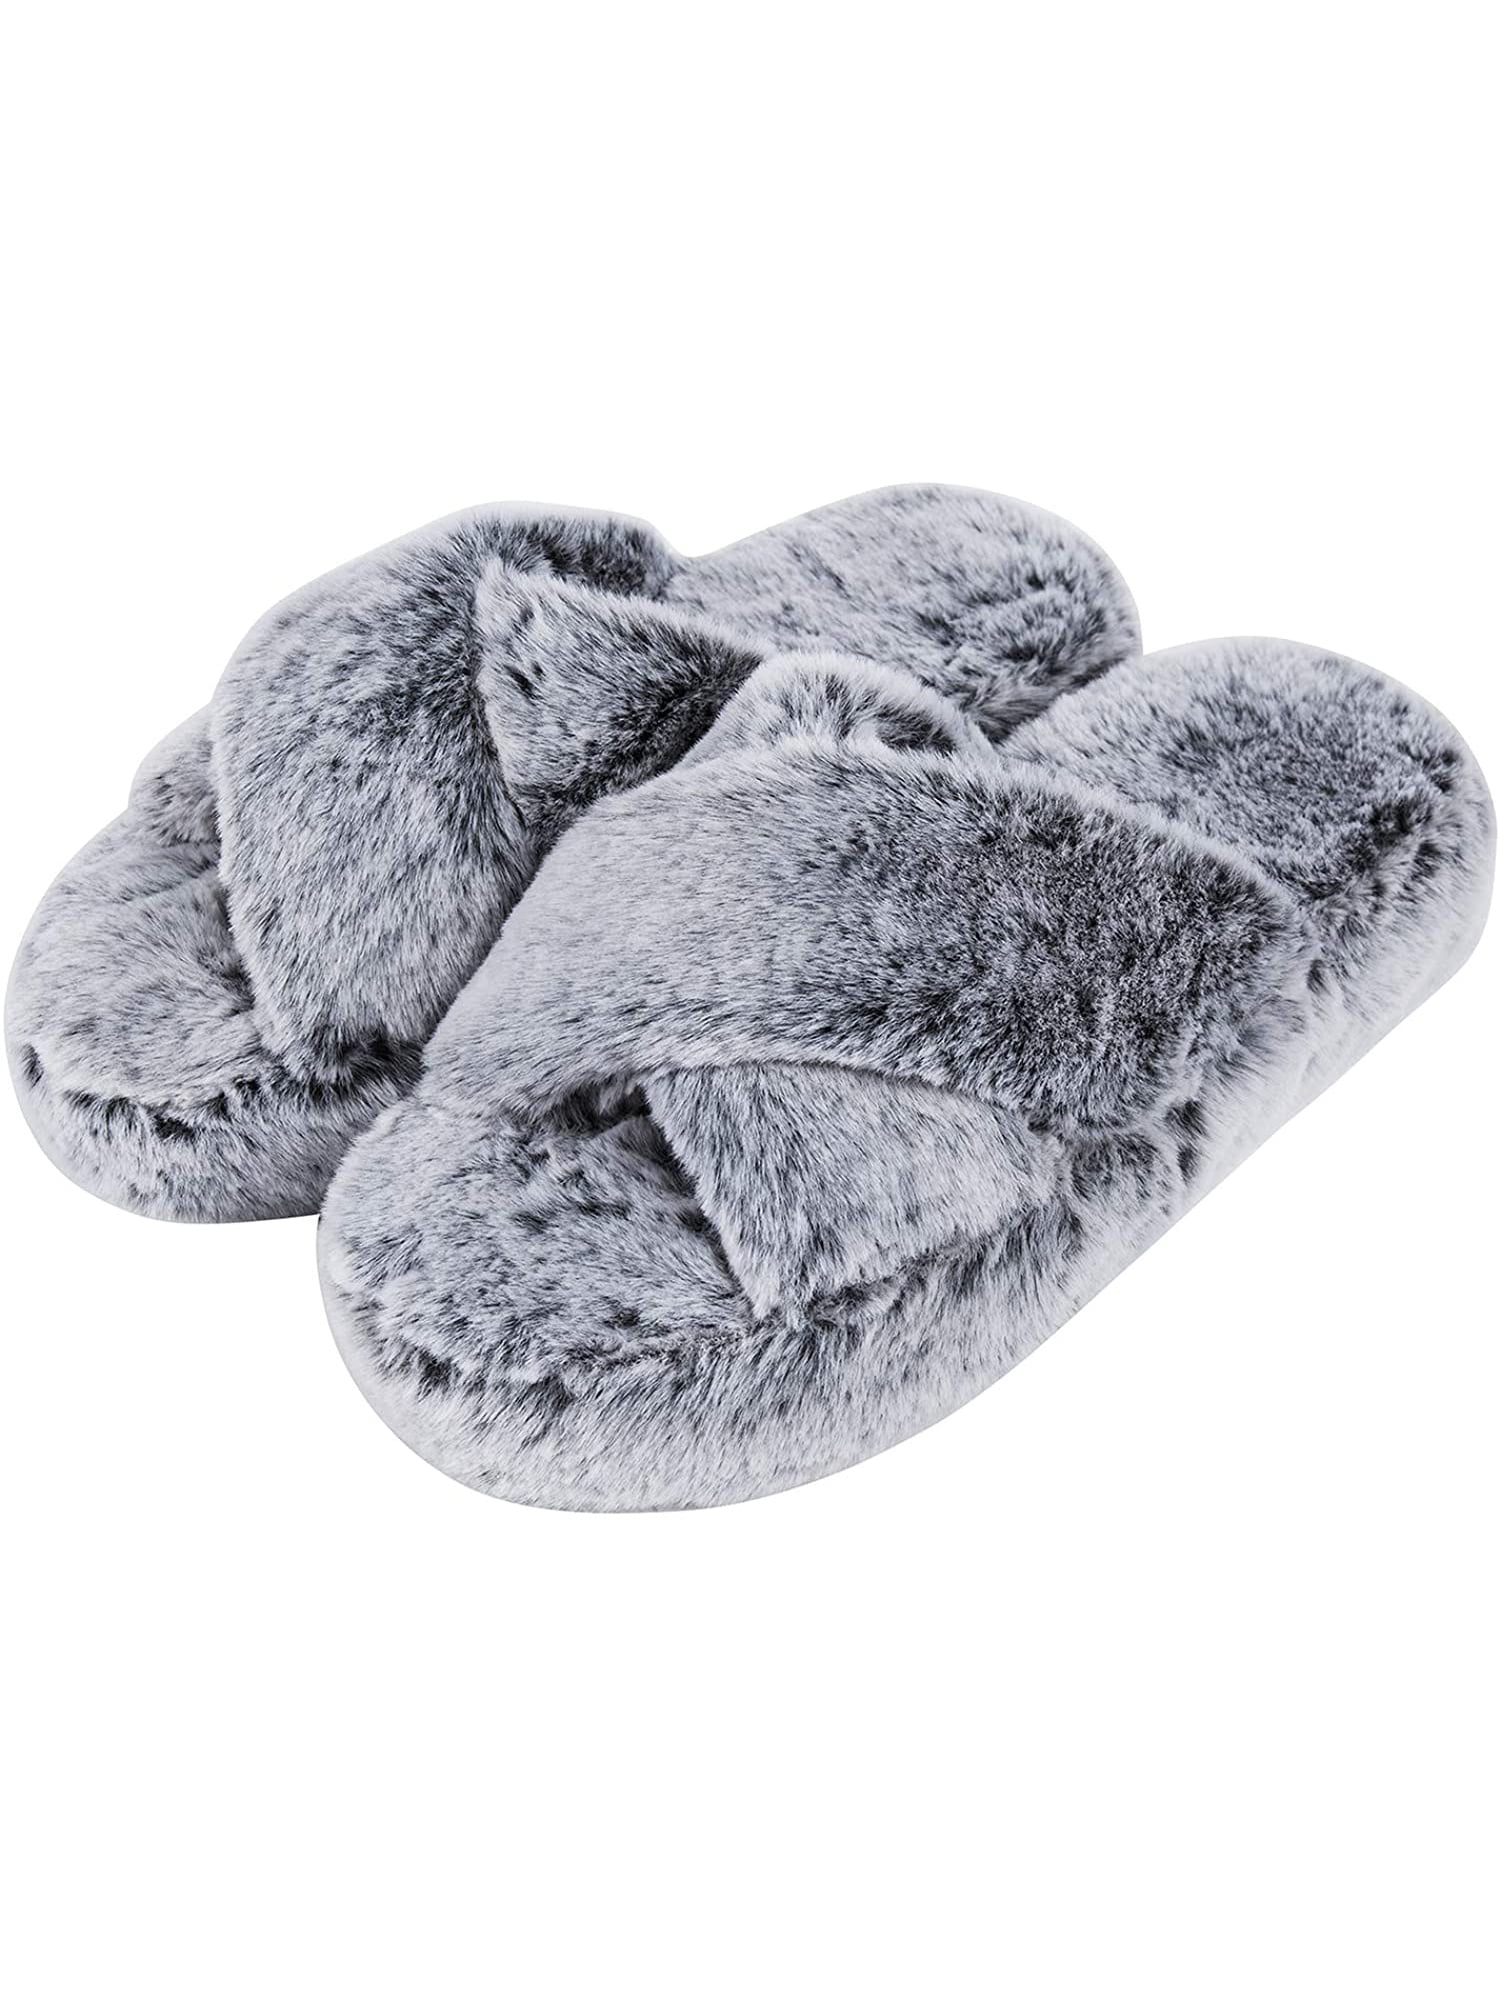 DL Fluffy Womens House Slippers Cross Band